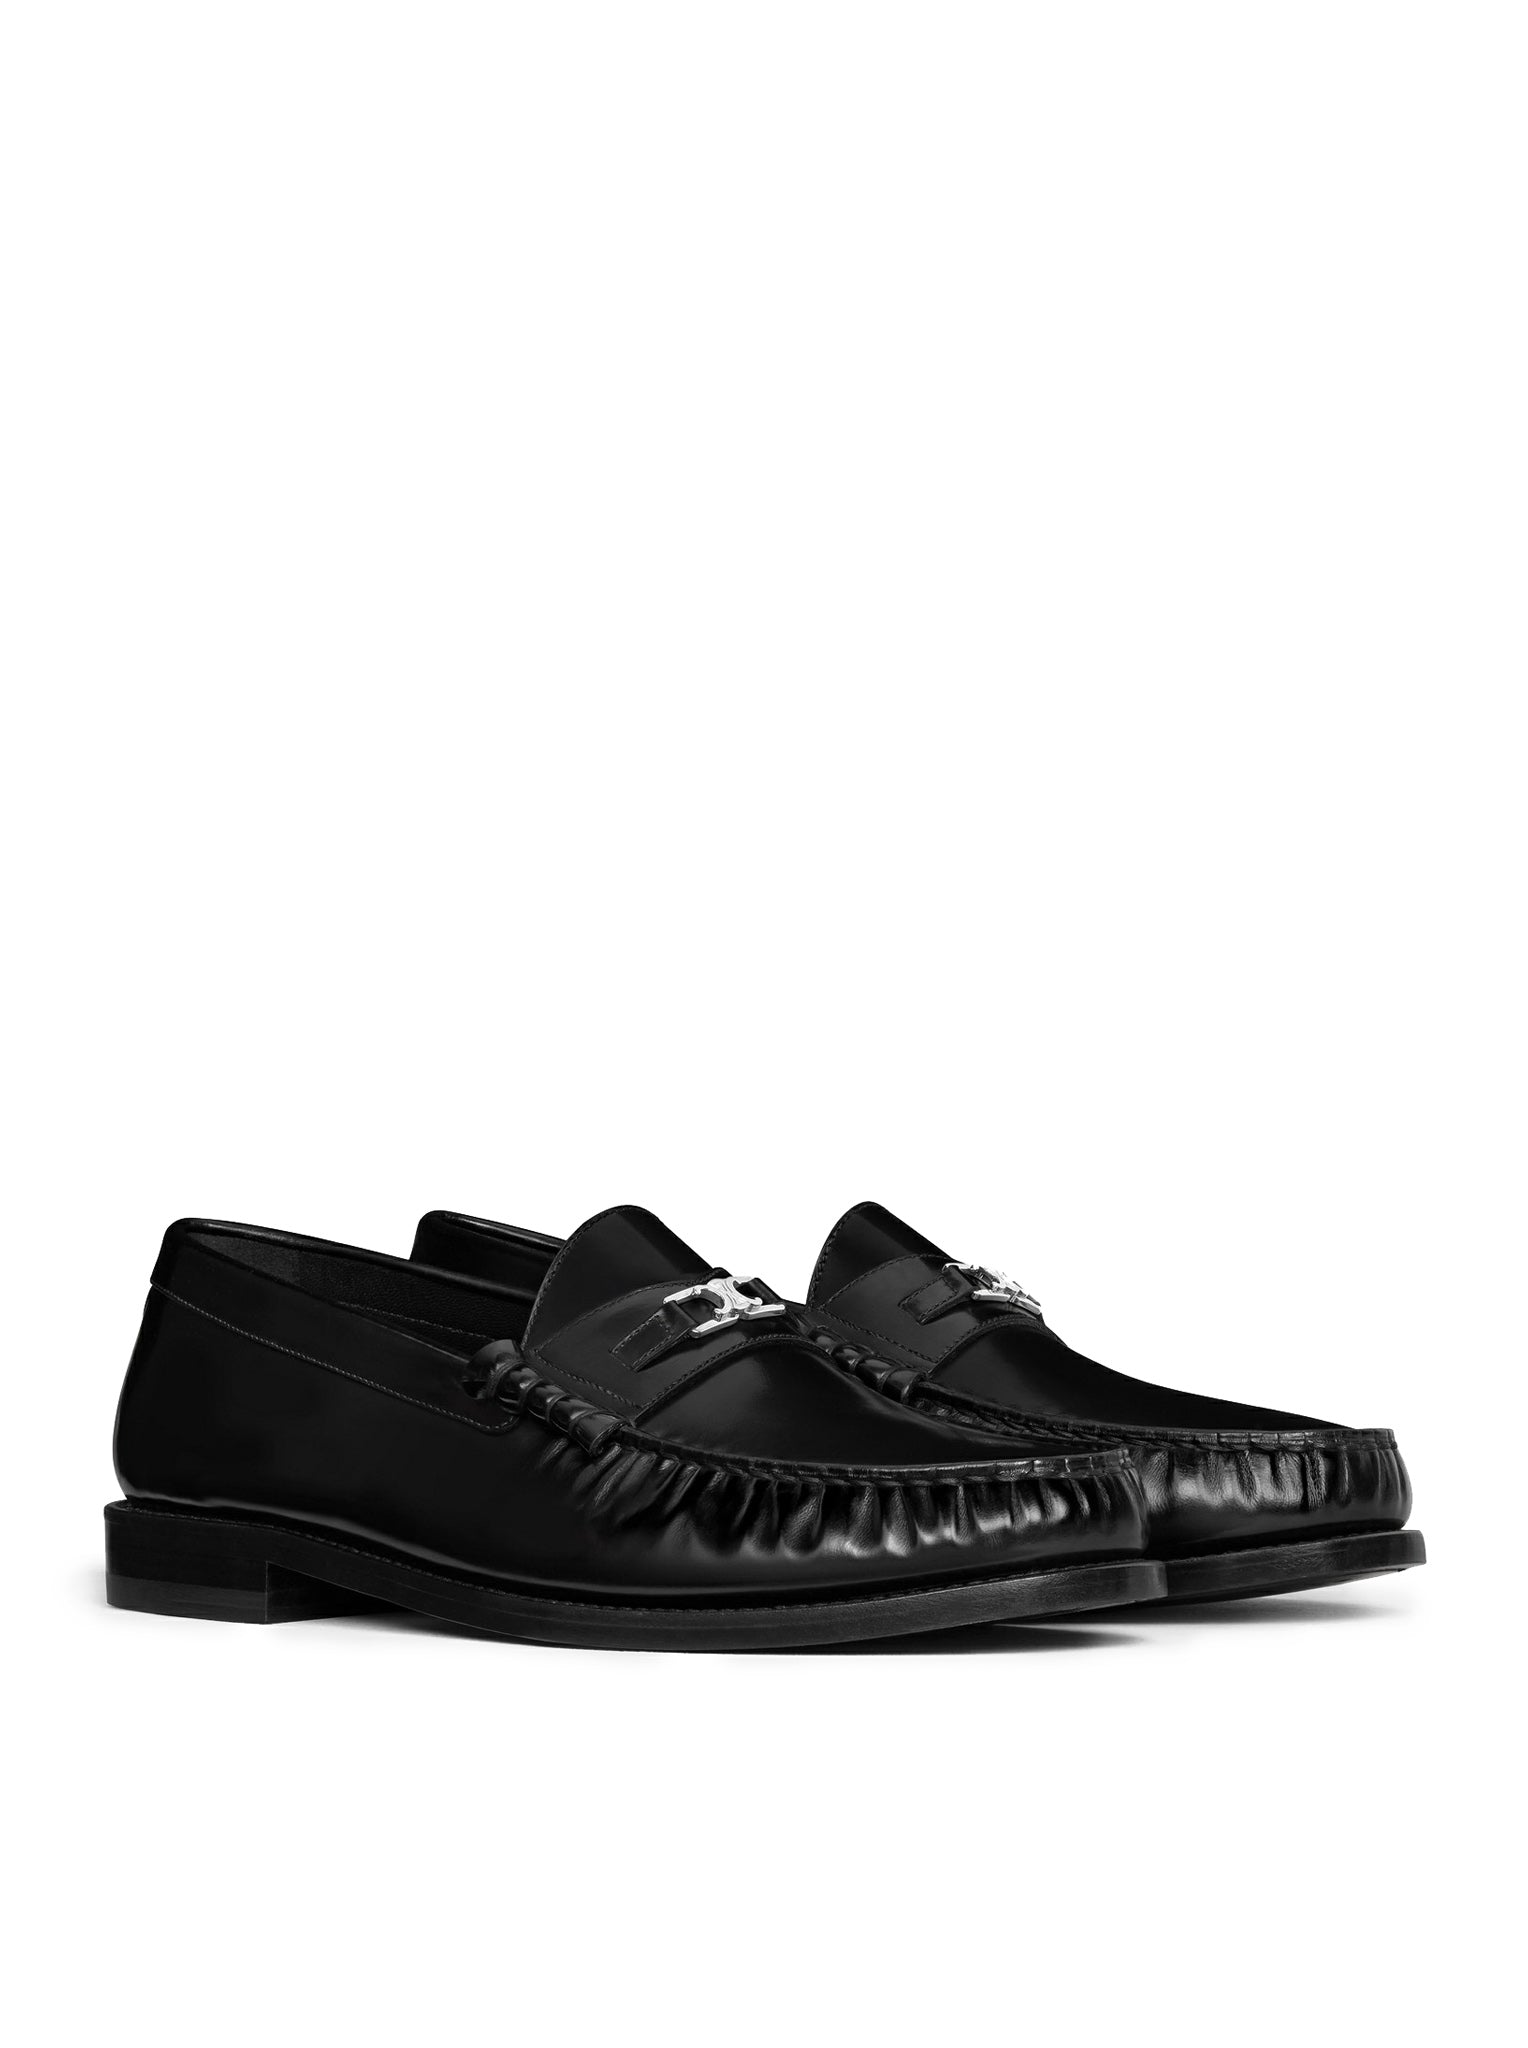 TRIOMPHE CELINE LUCO LOAFERS IN POLISHED BULLS LEATHER